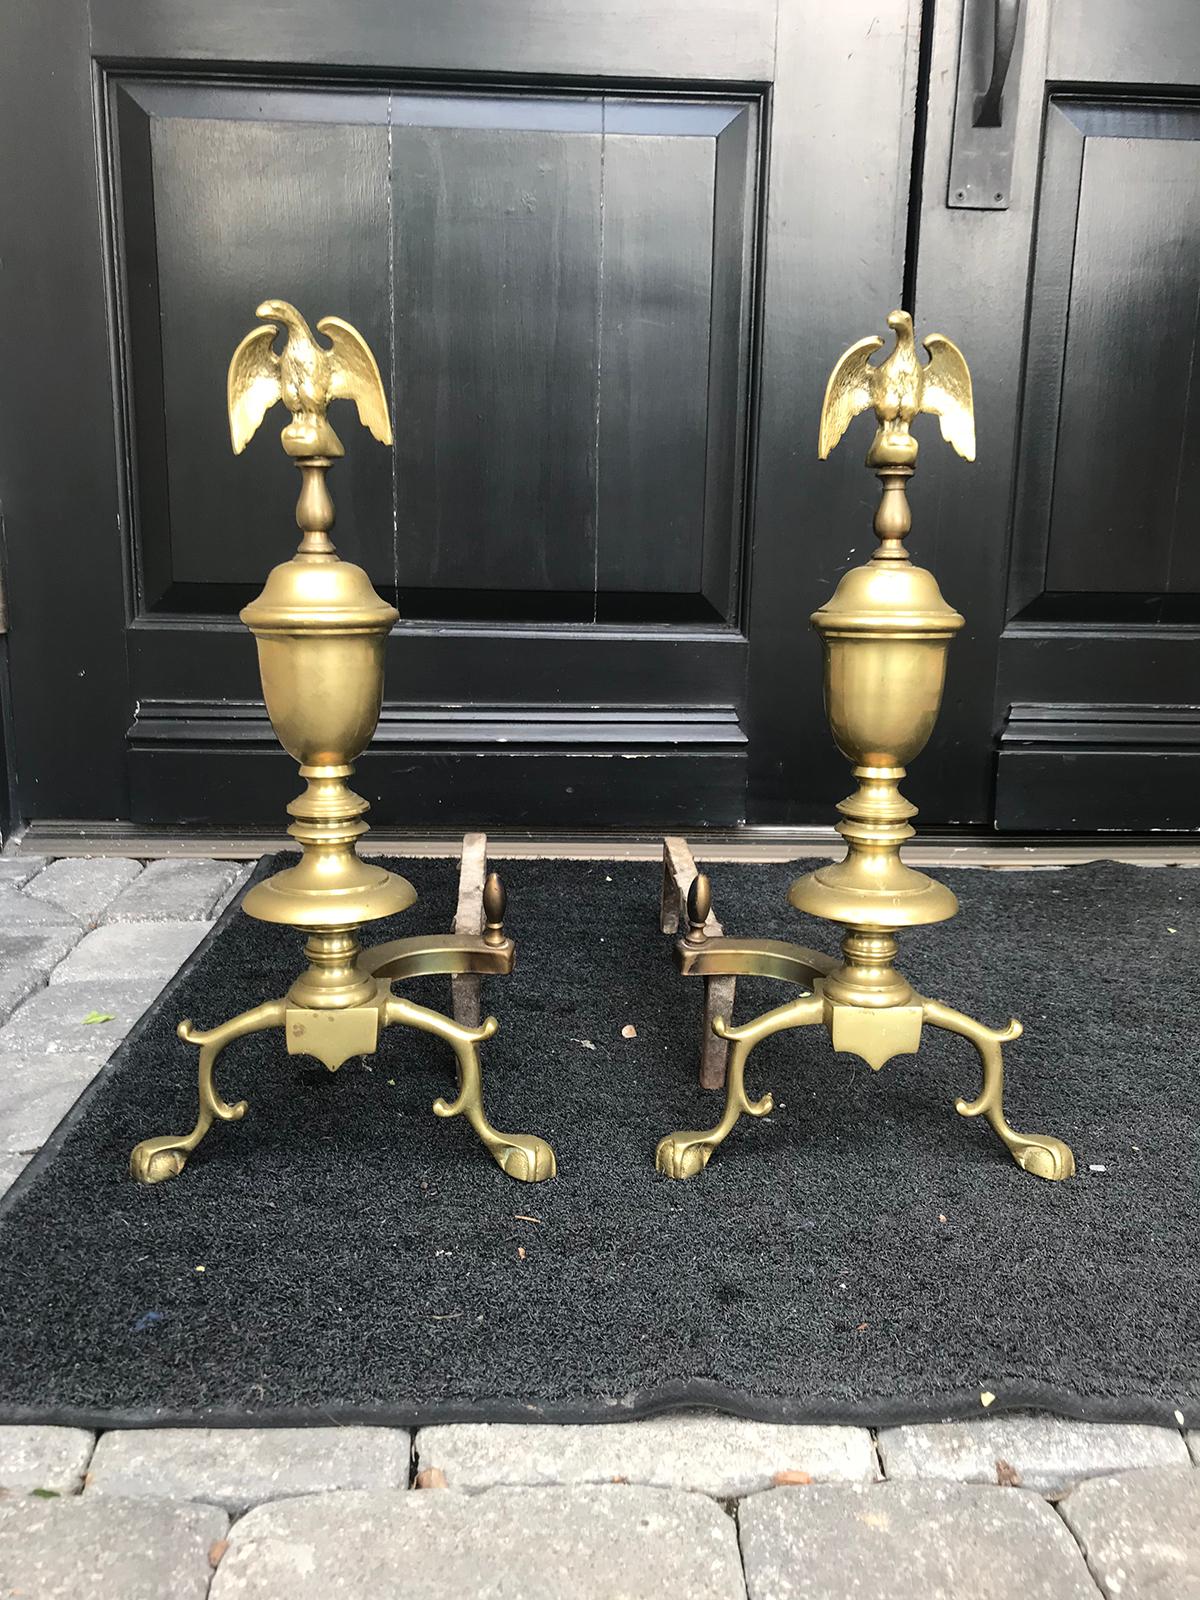 Pair of early 20th century federal style andirons with eagles.